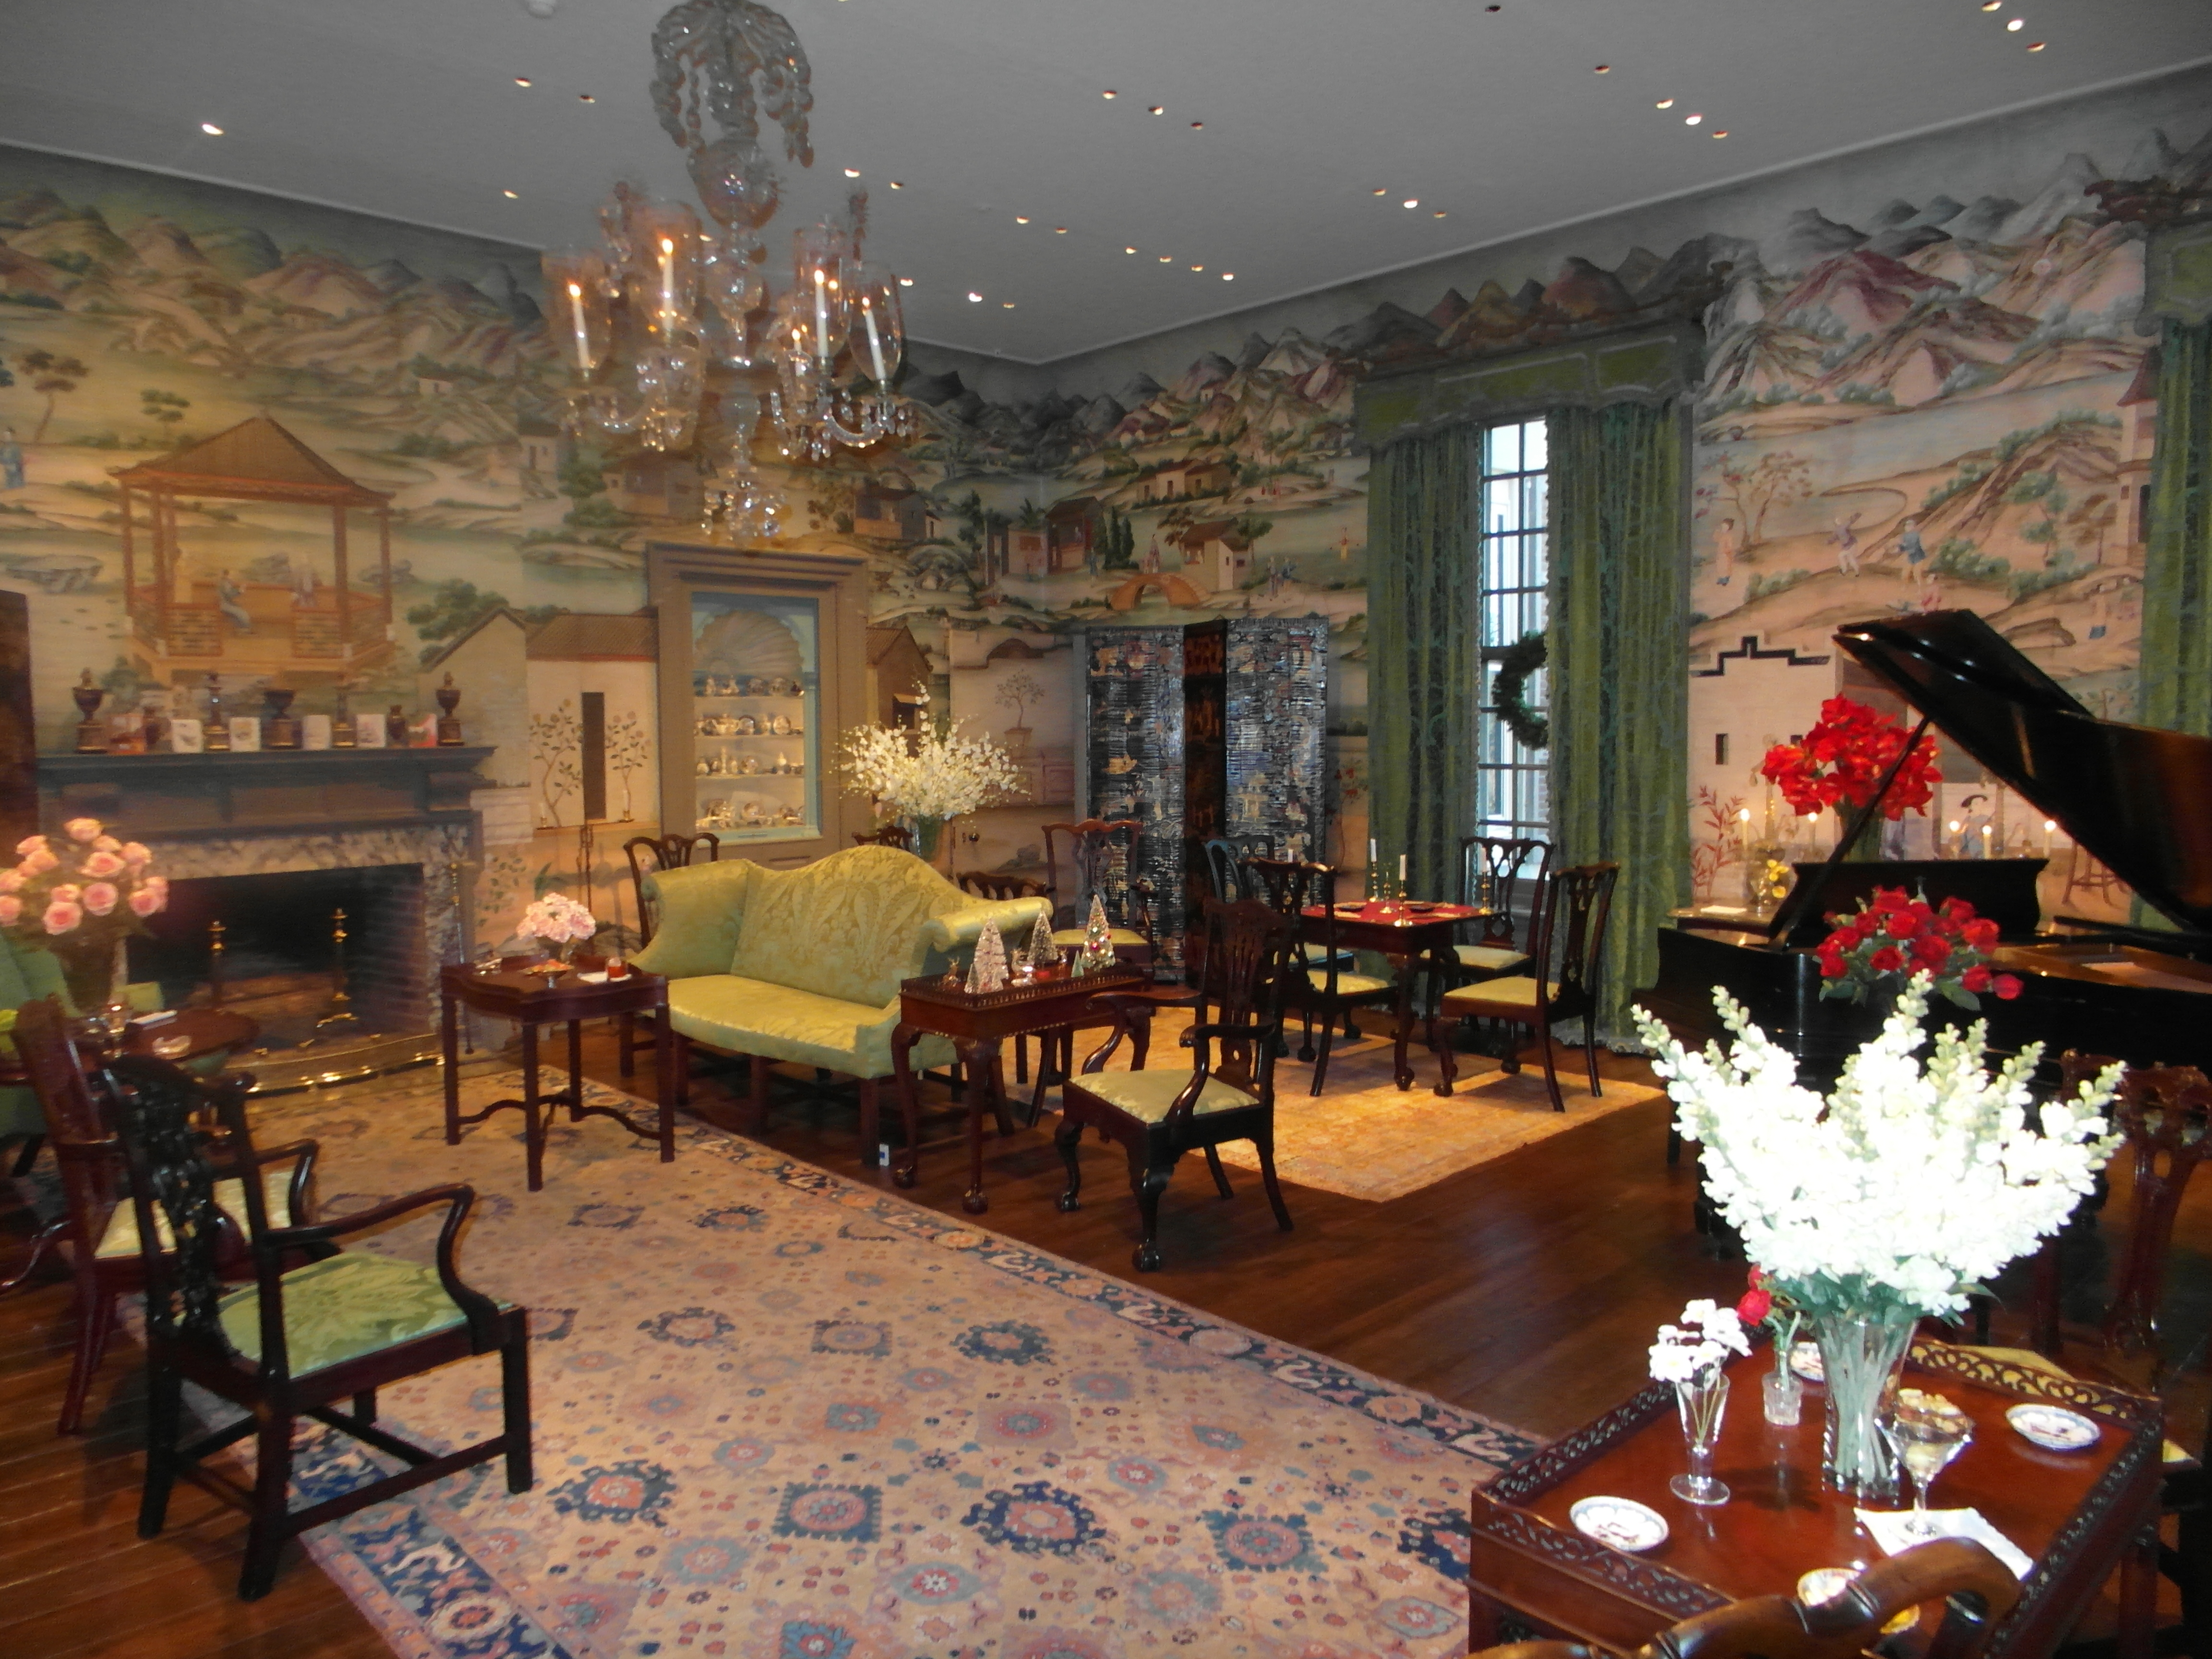 Winterthur Museum : One of the 175 rooms in the Winterthur mansion